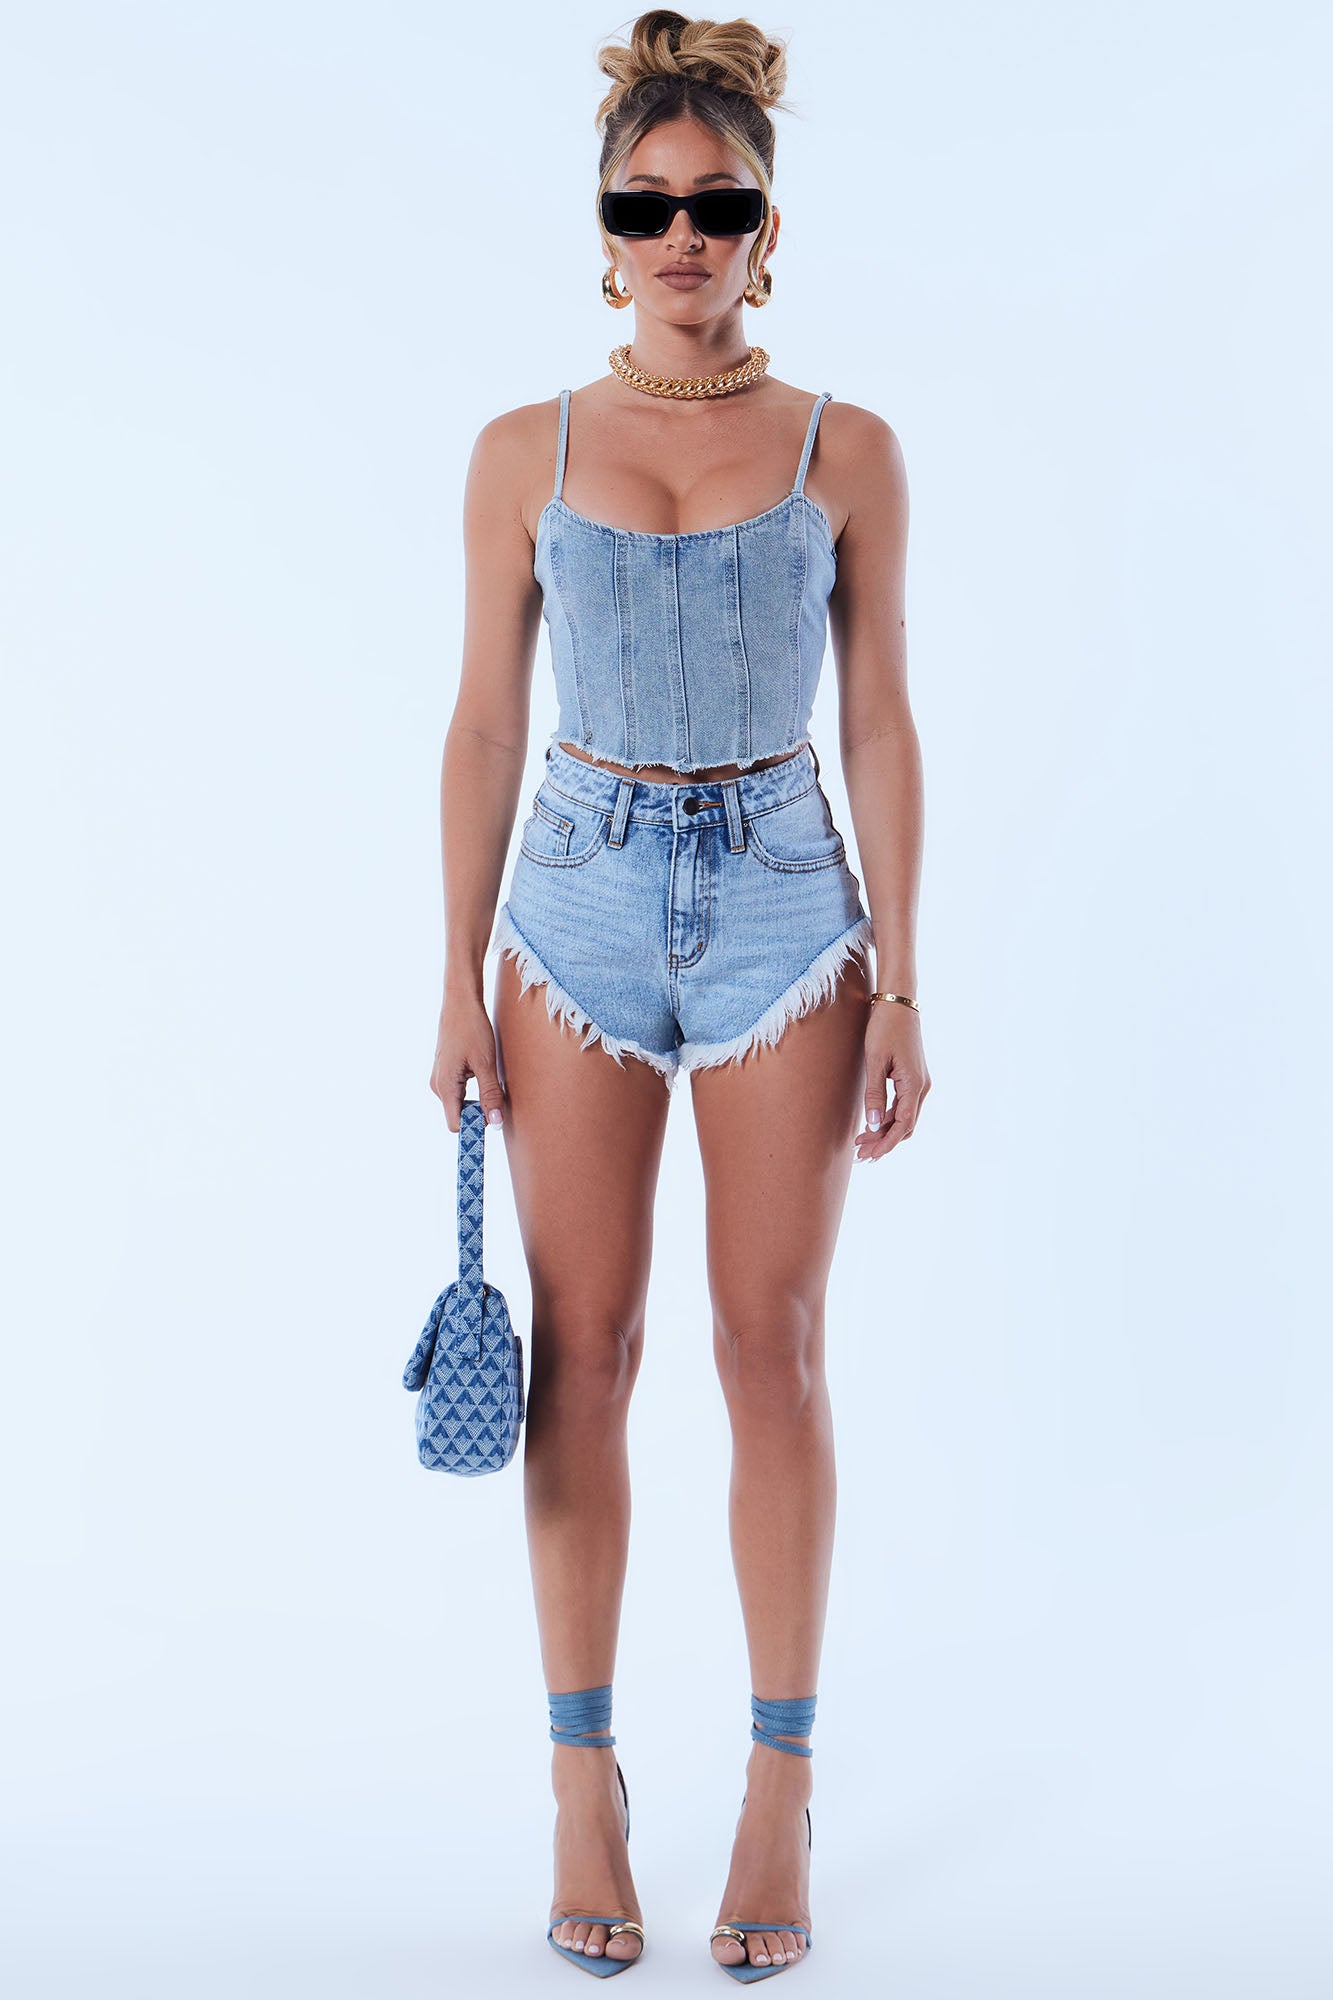 How to Wear Pants This Festival Season If You're Sick of Denim Cutoffs